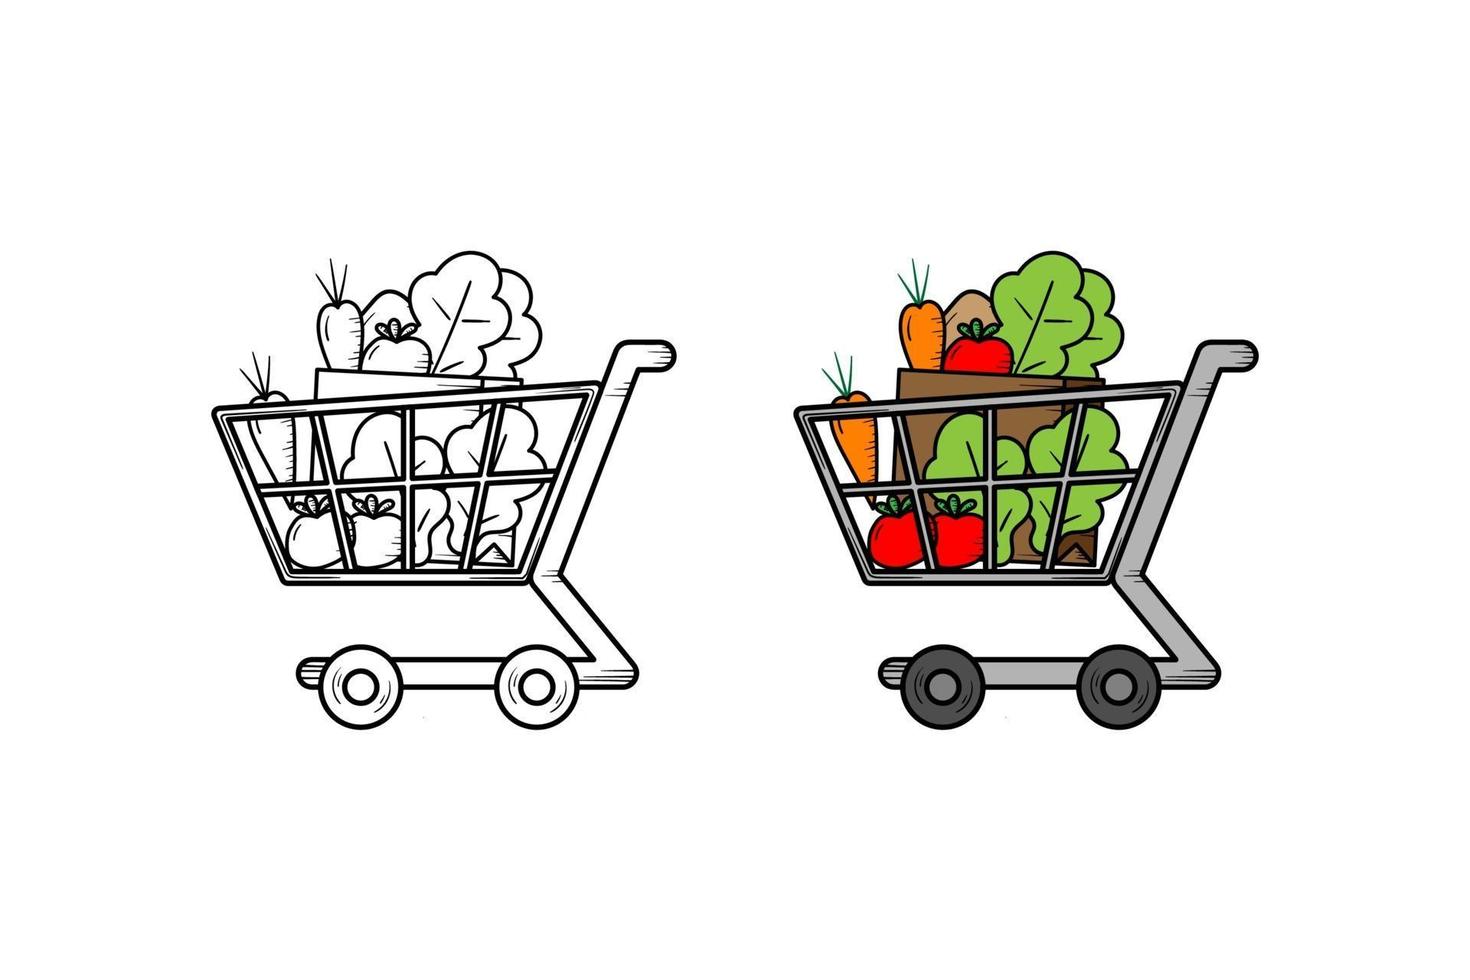 Shopping cart vegetables hand drawn illustration sketch and color vector